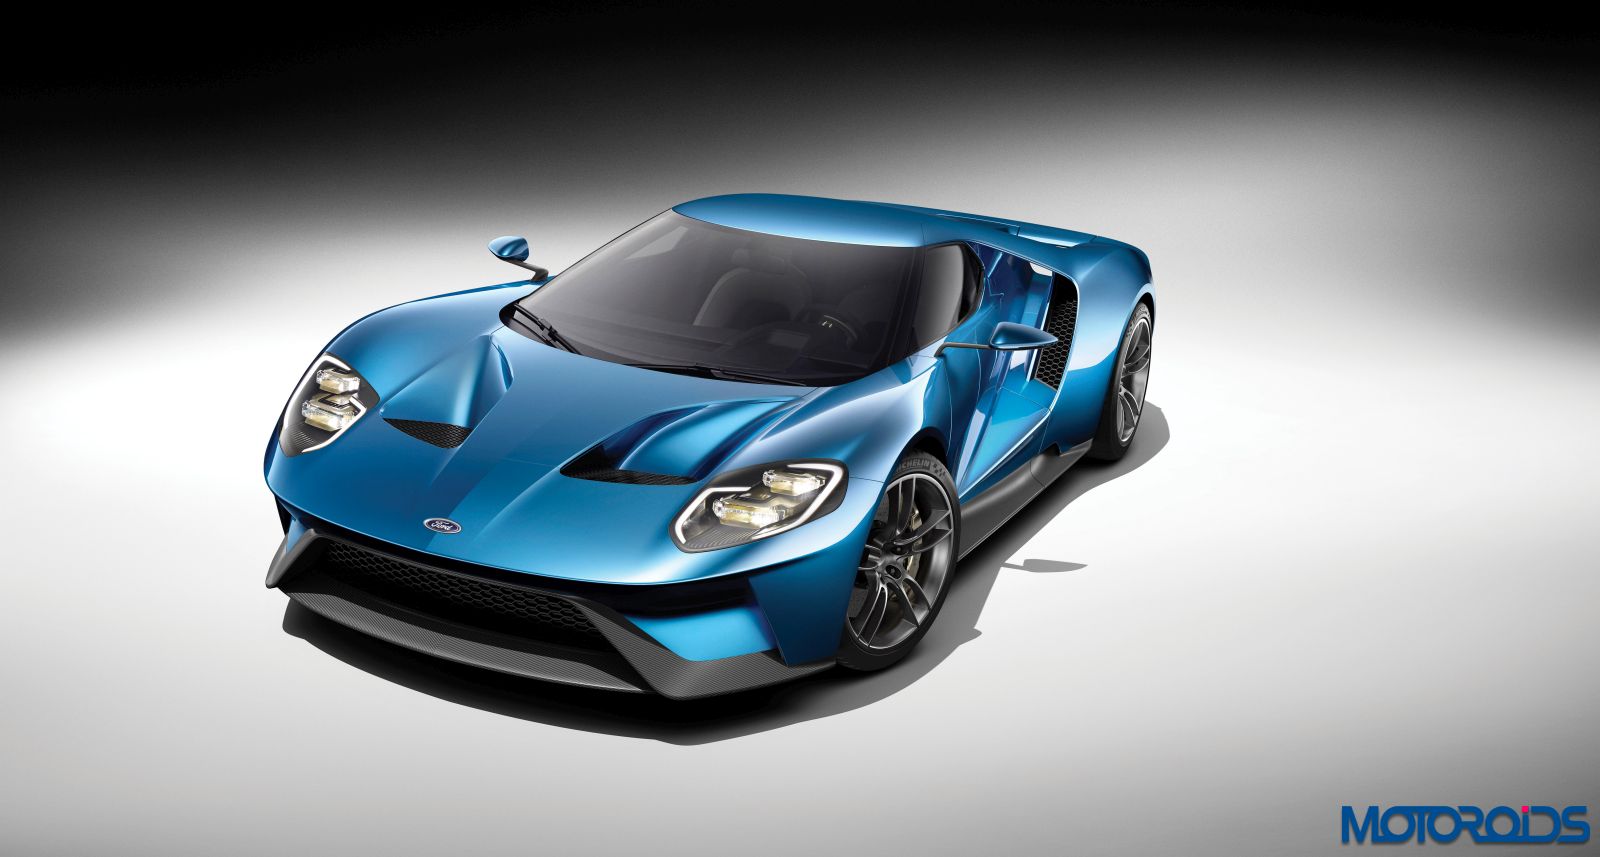 The all-new Ford GT is an ultra-high performance supercar that serves as a technology showcase for top EcoBoost® performance, aerodynamics and lightweight carbon fiber construction. With the GT, Ford returned this year to the most prestigious 24-hour endurance race in the world, the 24 Hours of LeMans.